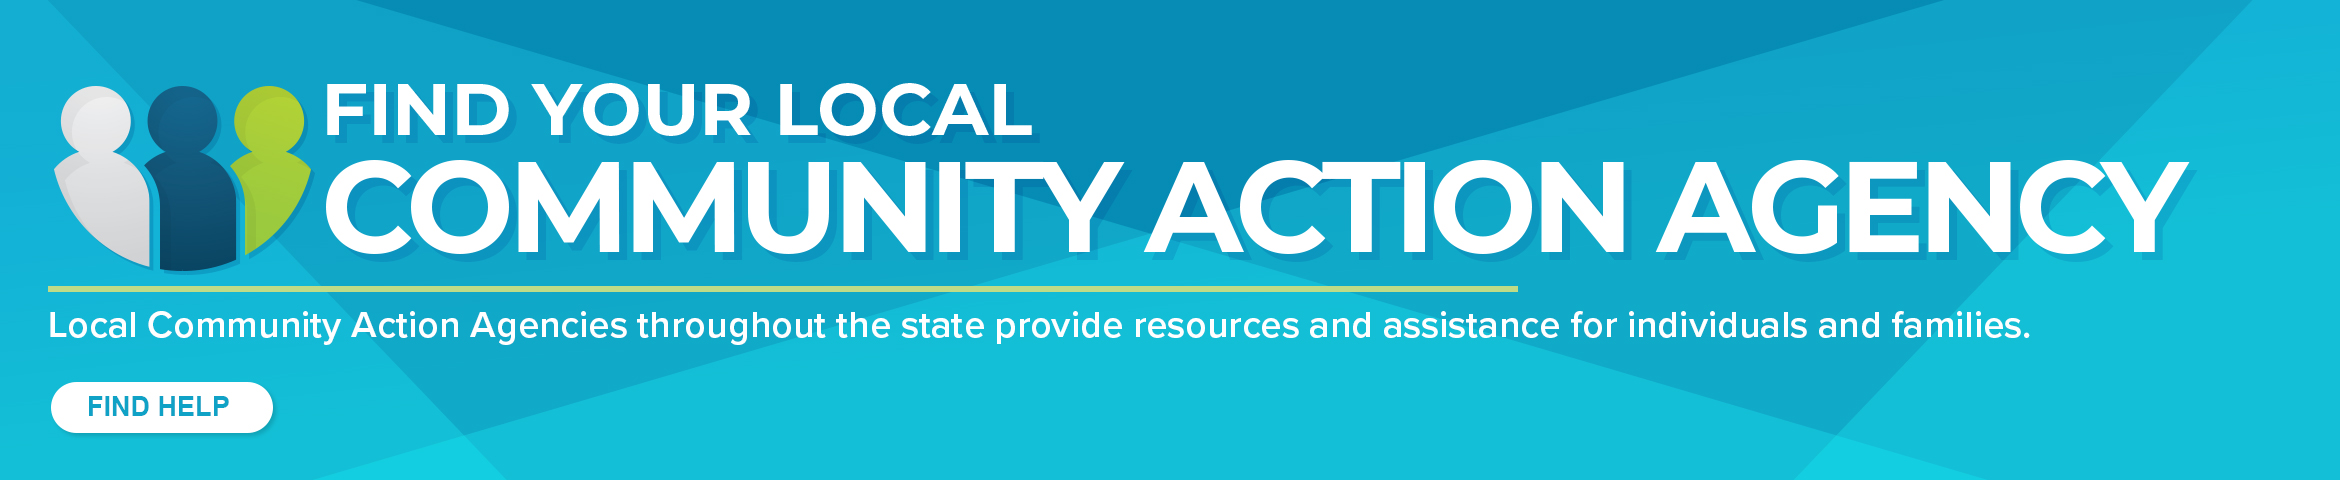 Community Action Agency homepage banner